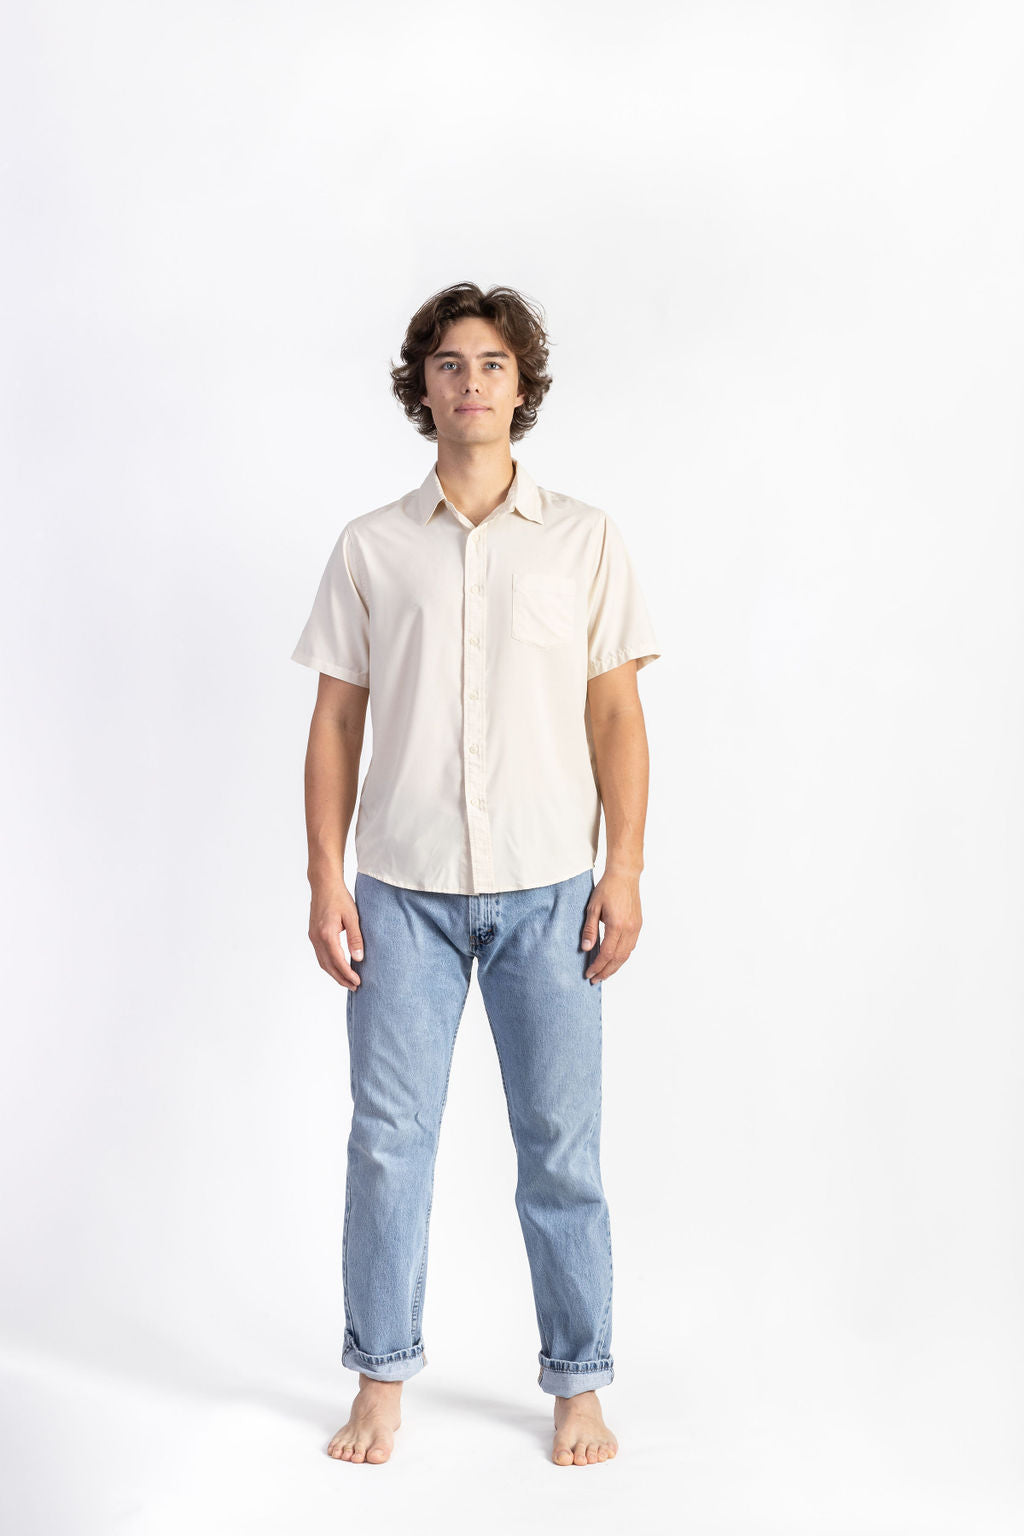 A man wearing an Off-White Breeze Button Up shirt having Manana branding with blue jeans